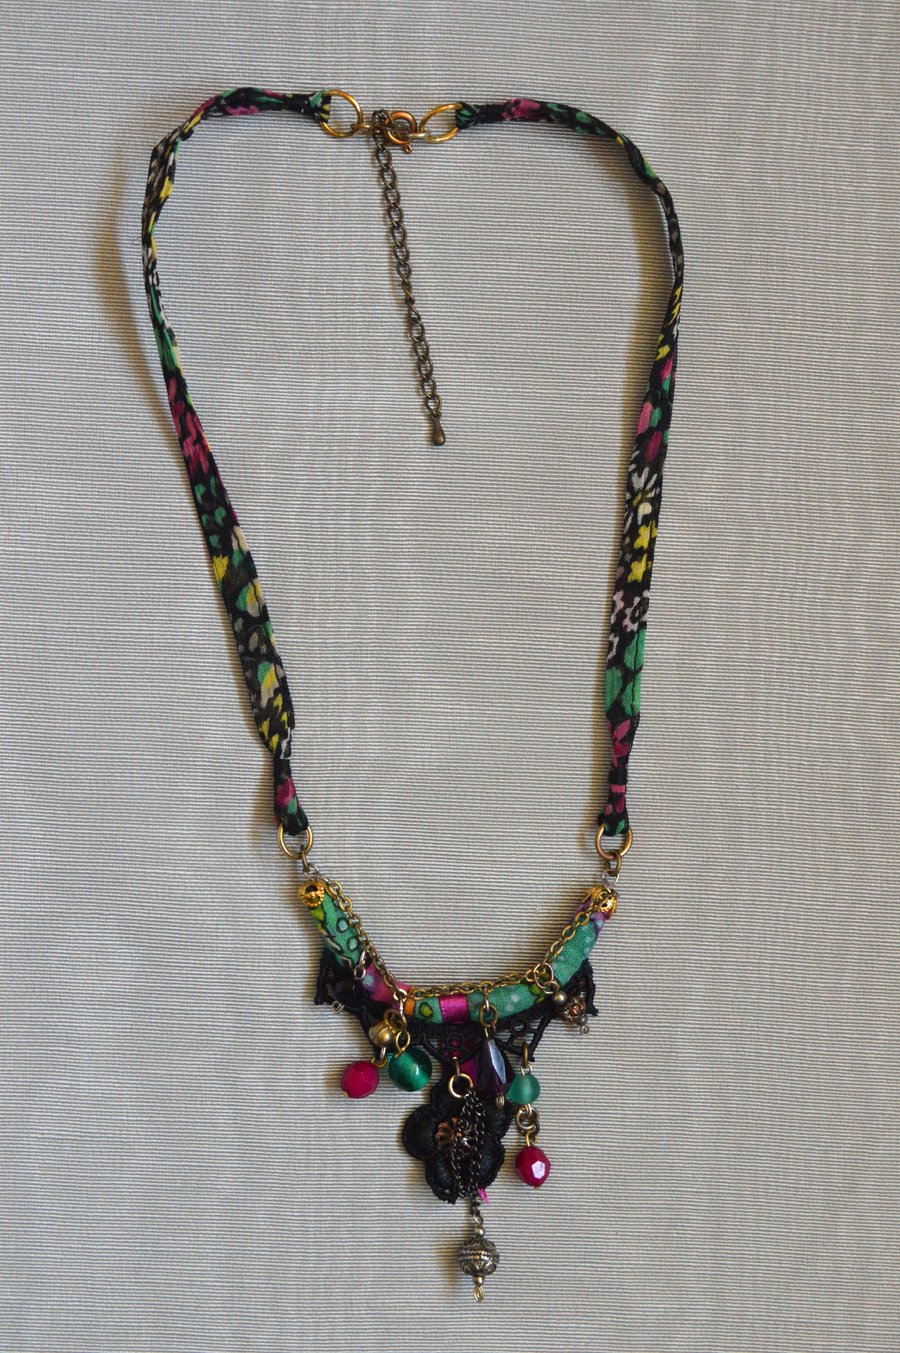 Textile and Bead Necklace